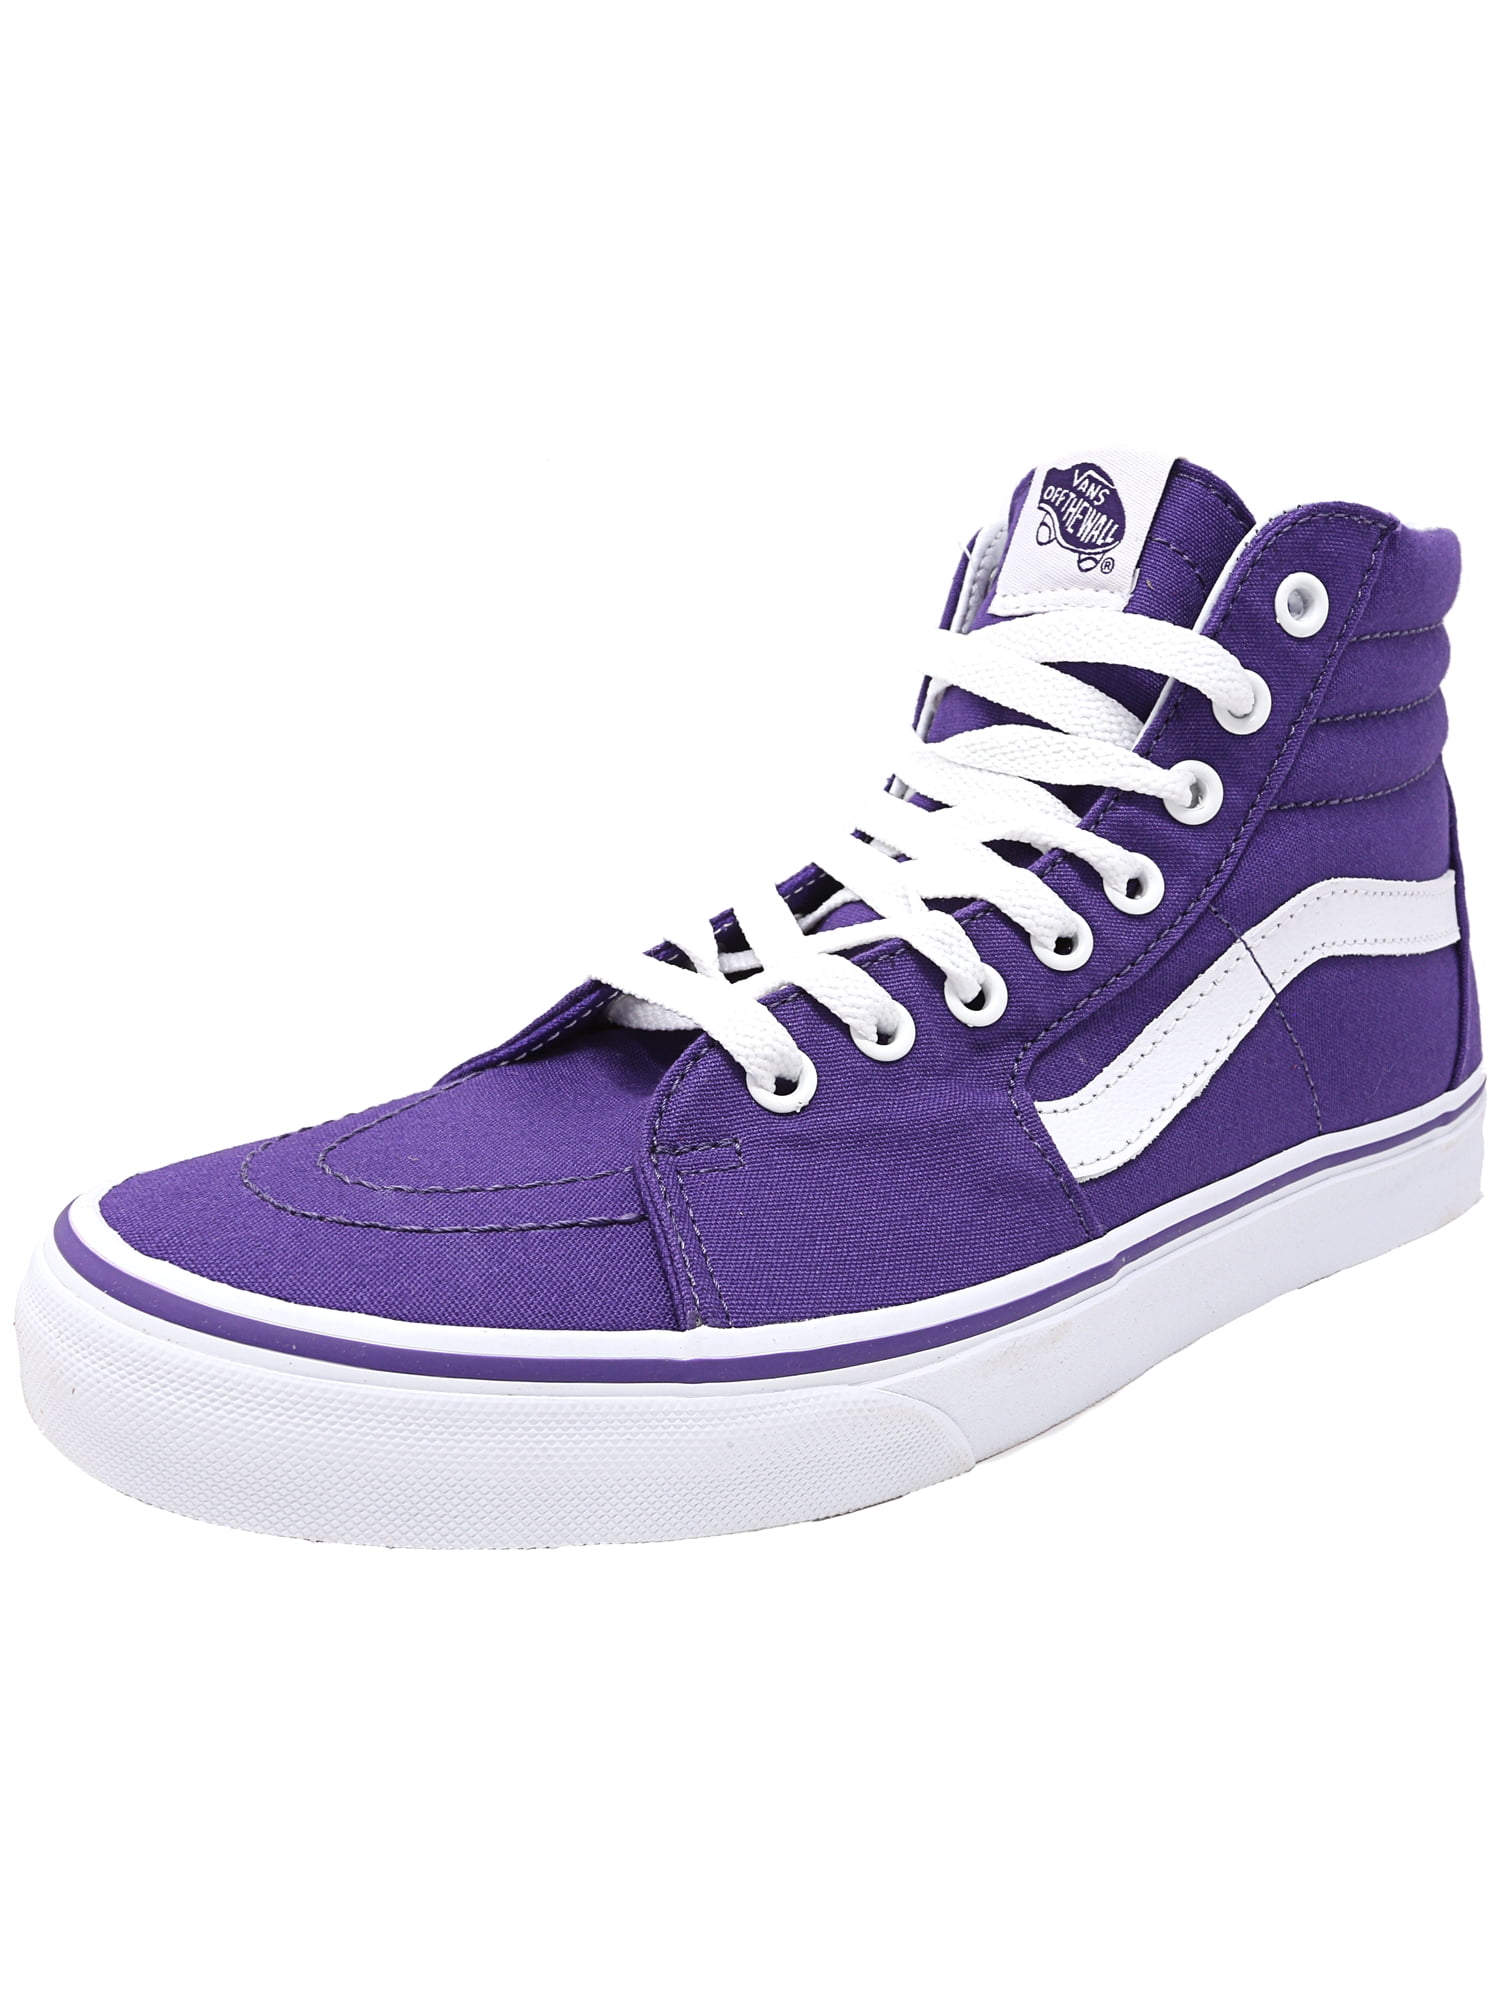 purple and white high top vans